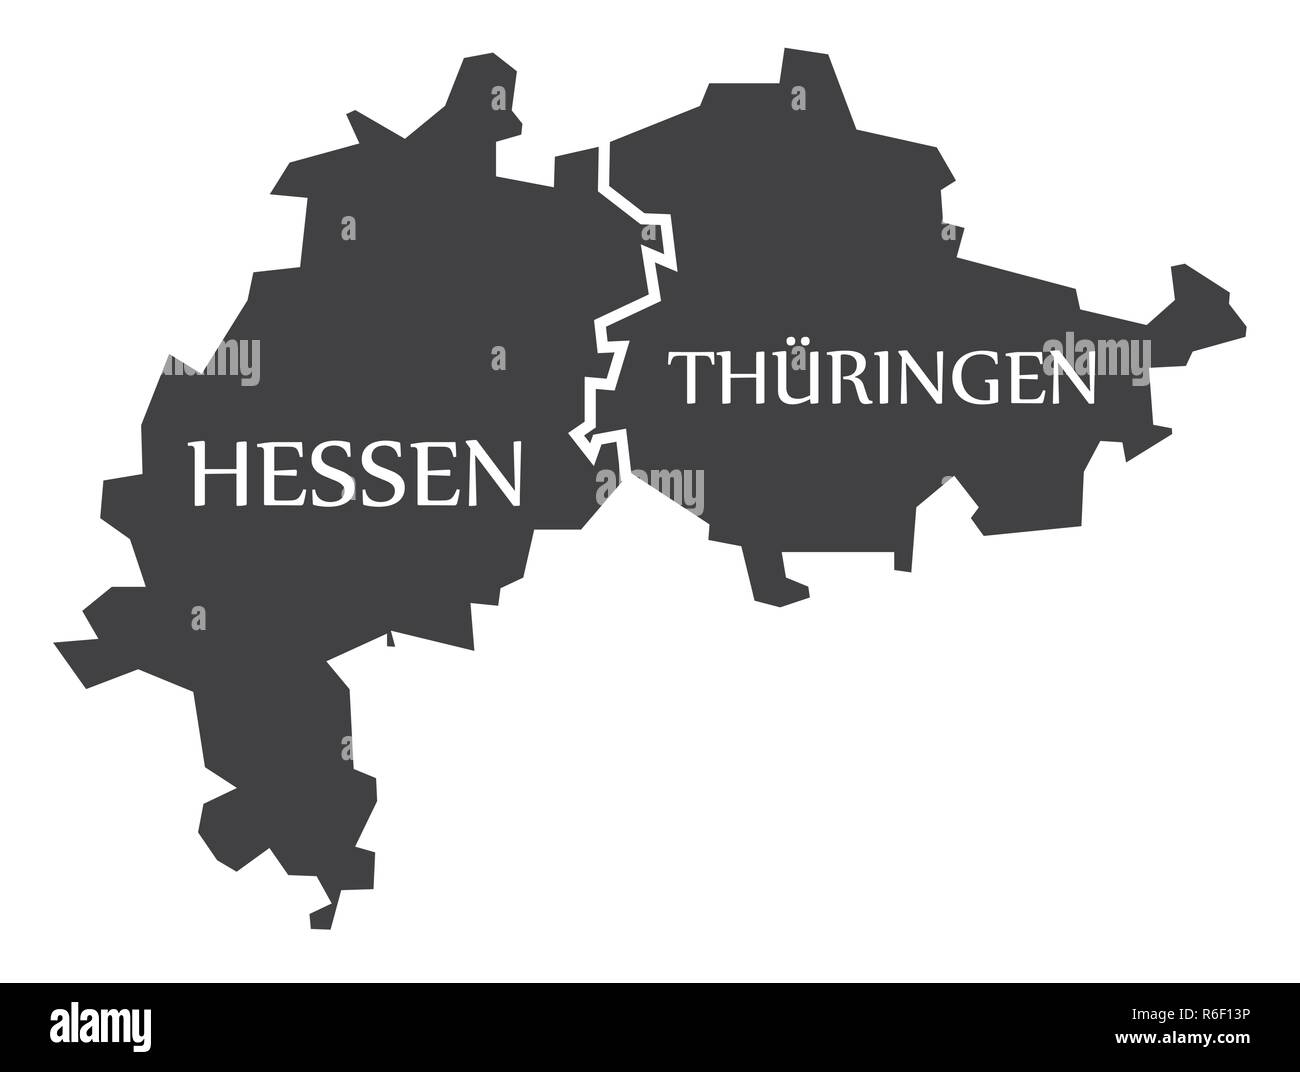 Hesse - Thuringia federal states map of Germany black with titles Stock Vector